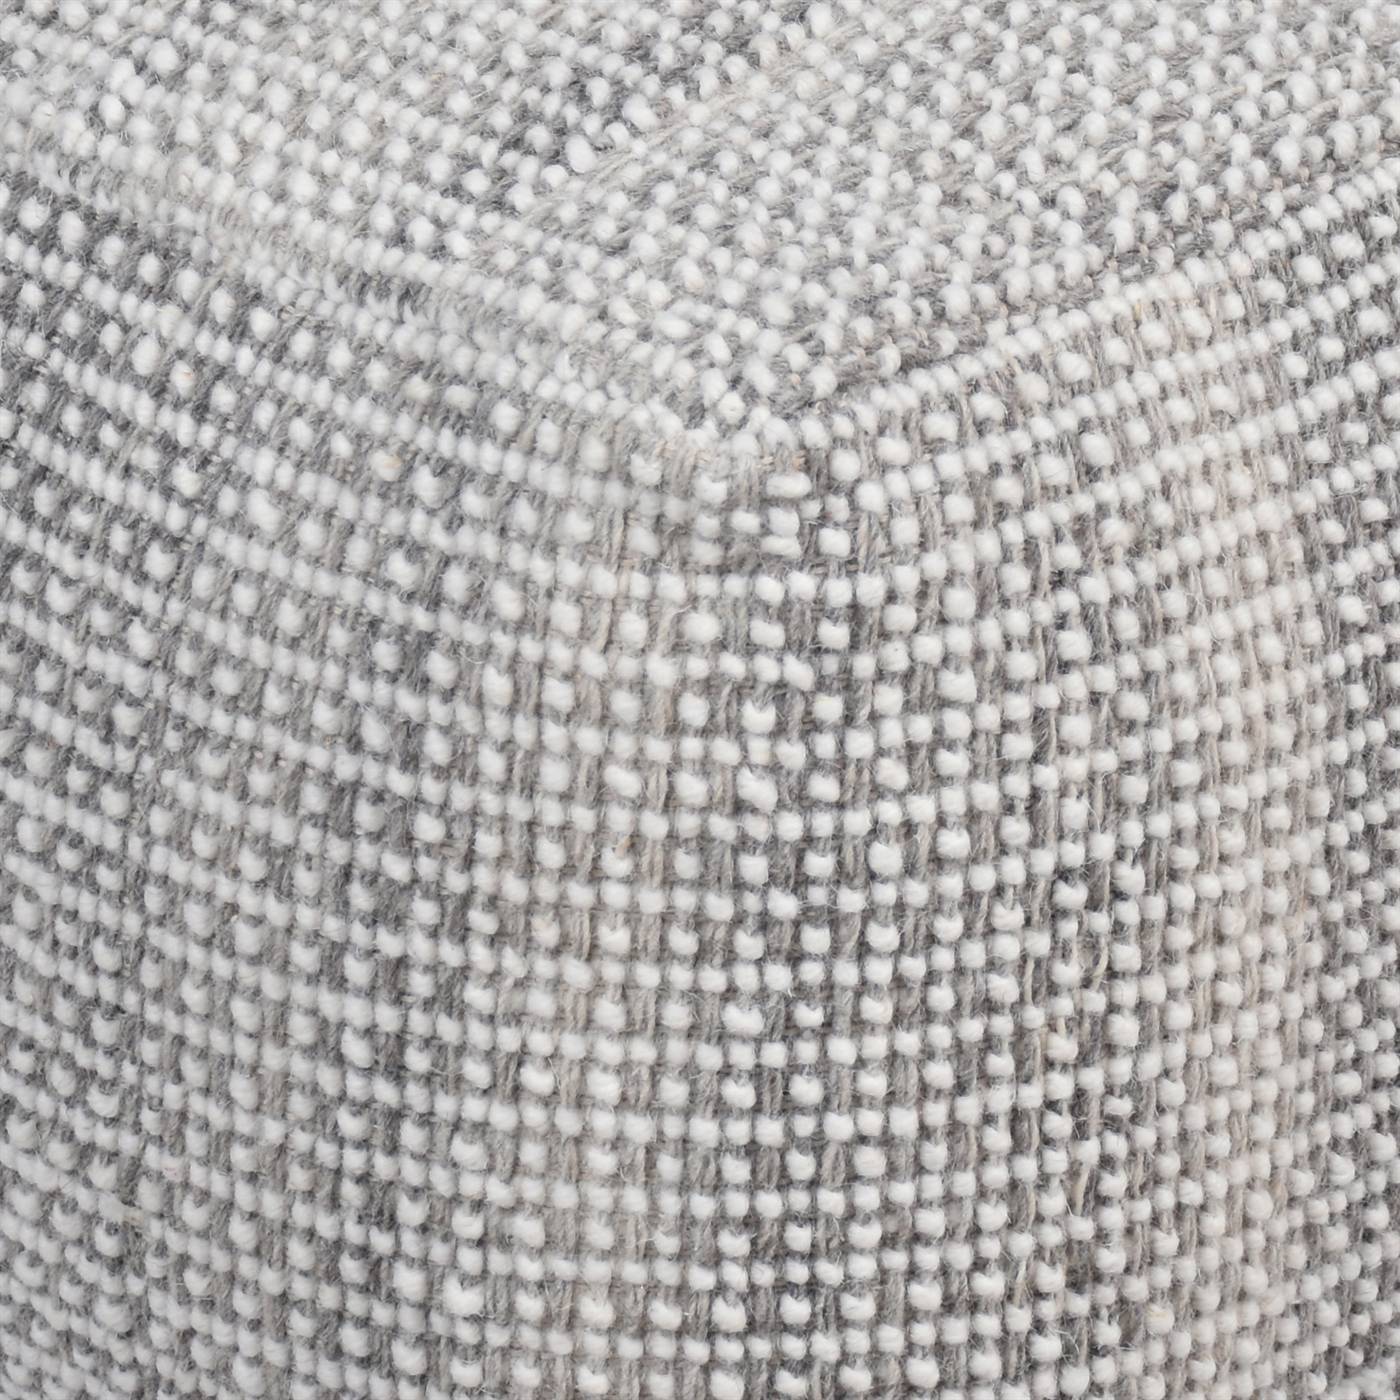 Highland Pouf, 40x40x40 cm, Grey, Wool, Hand Woven, Handwoven, All Loop